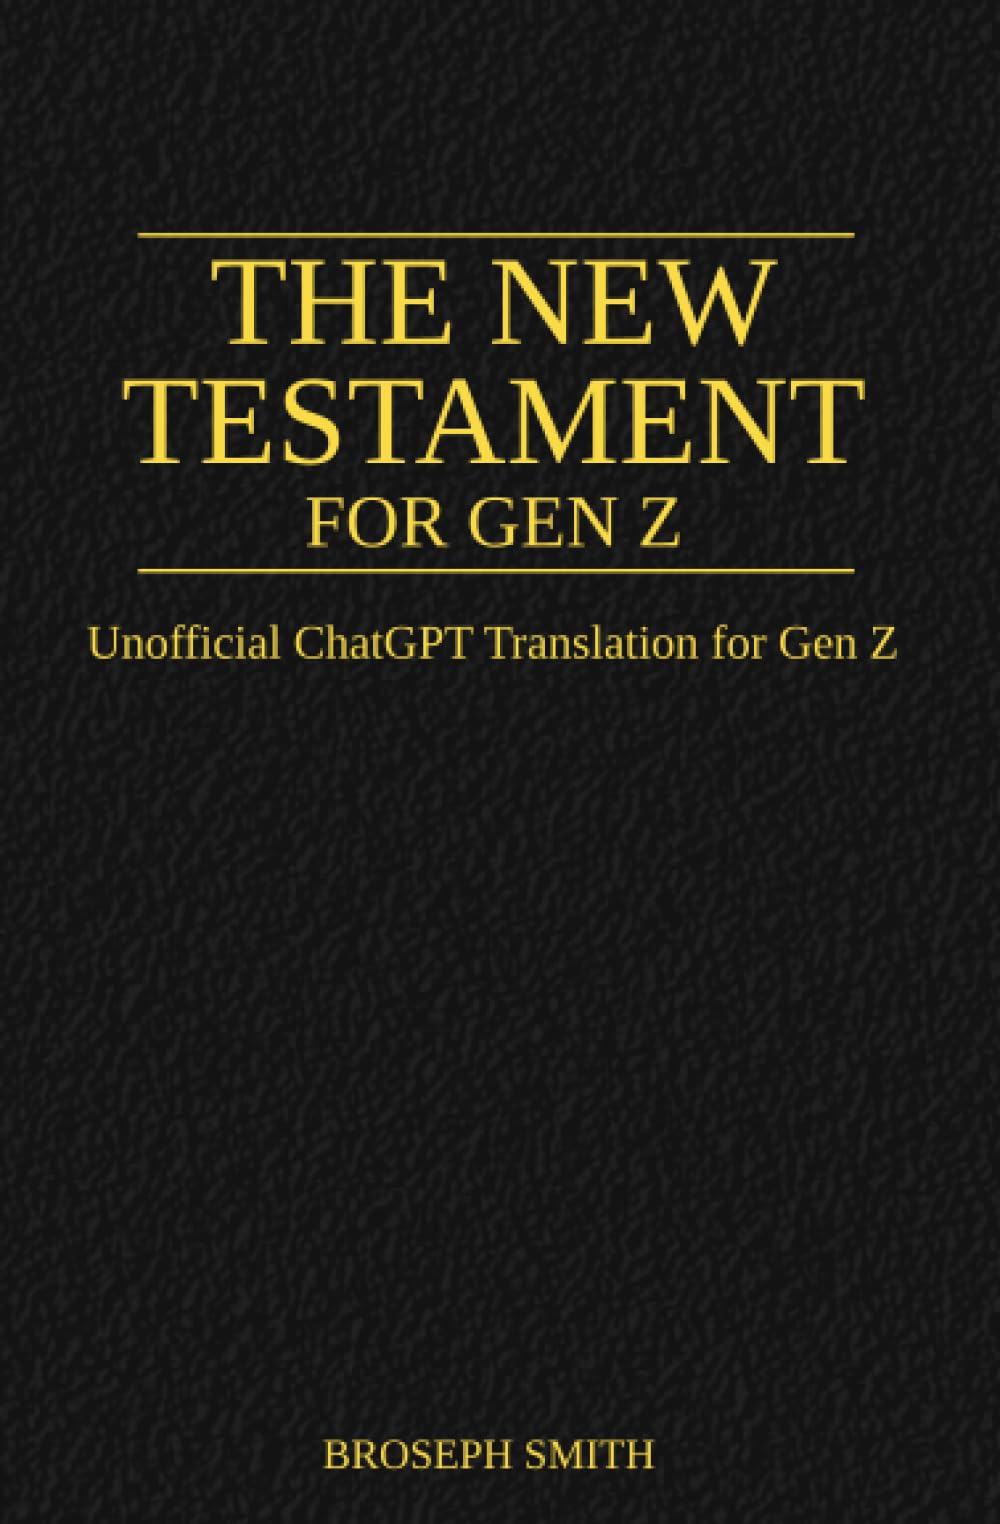 The New Testament For Gen Z